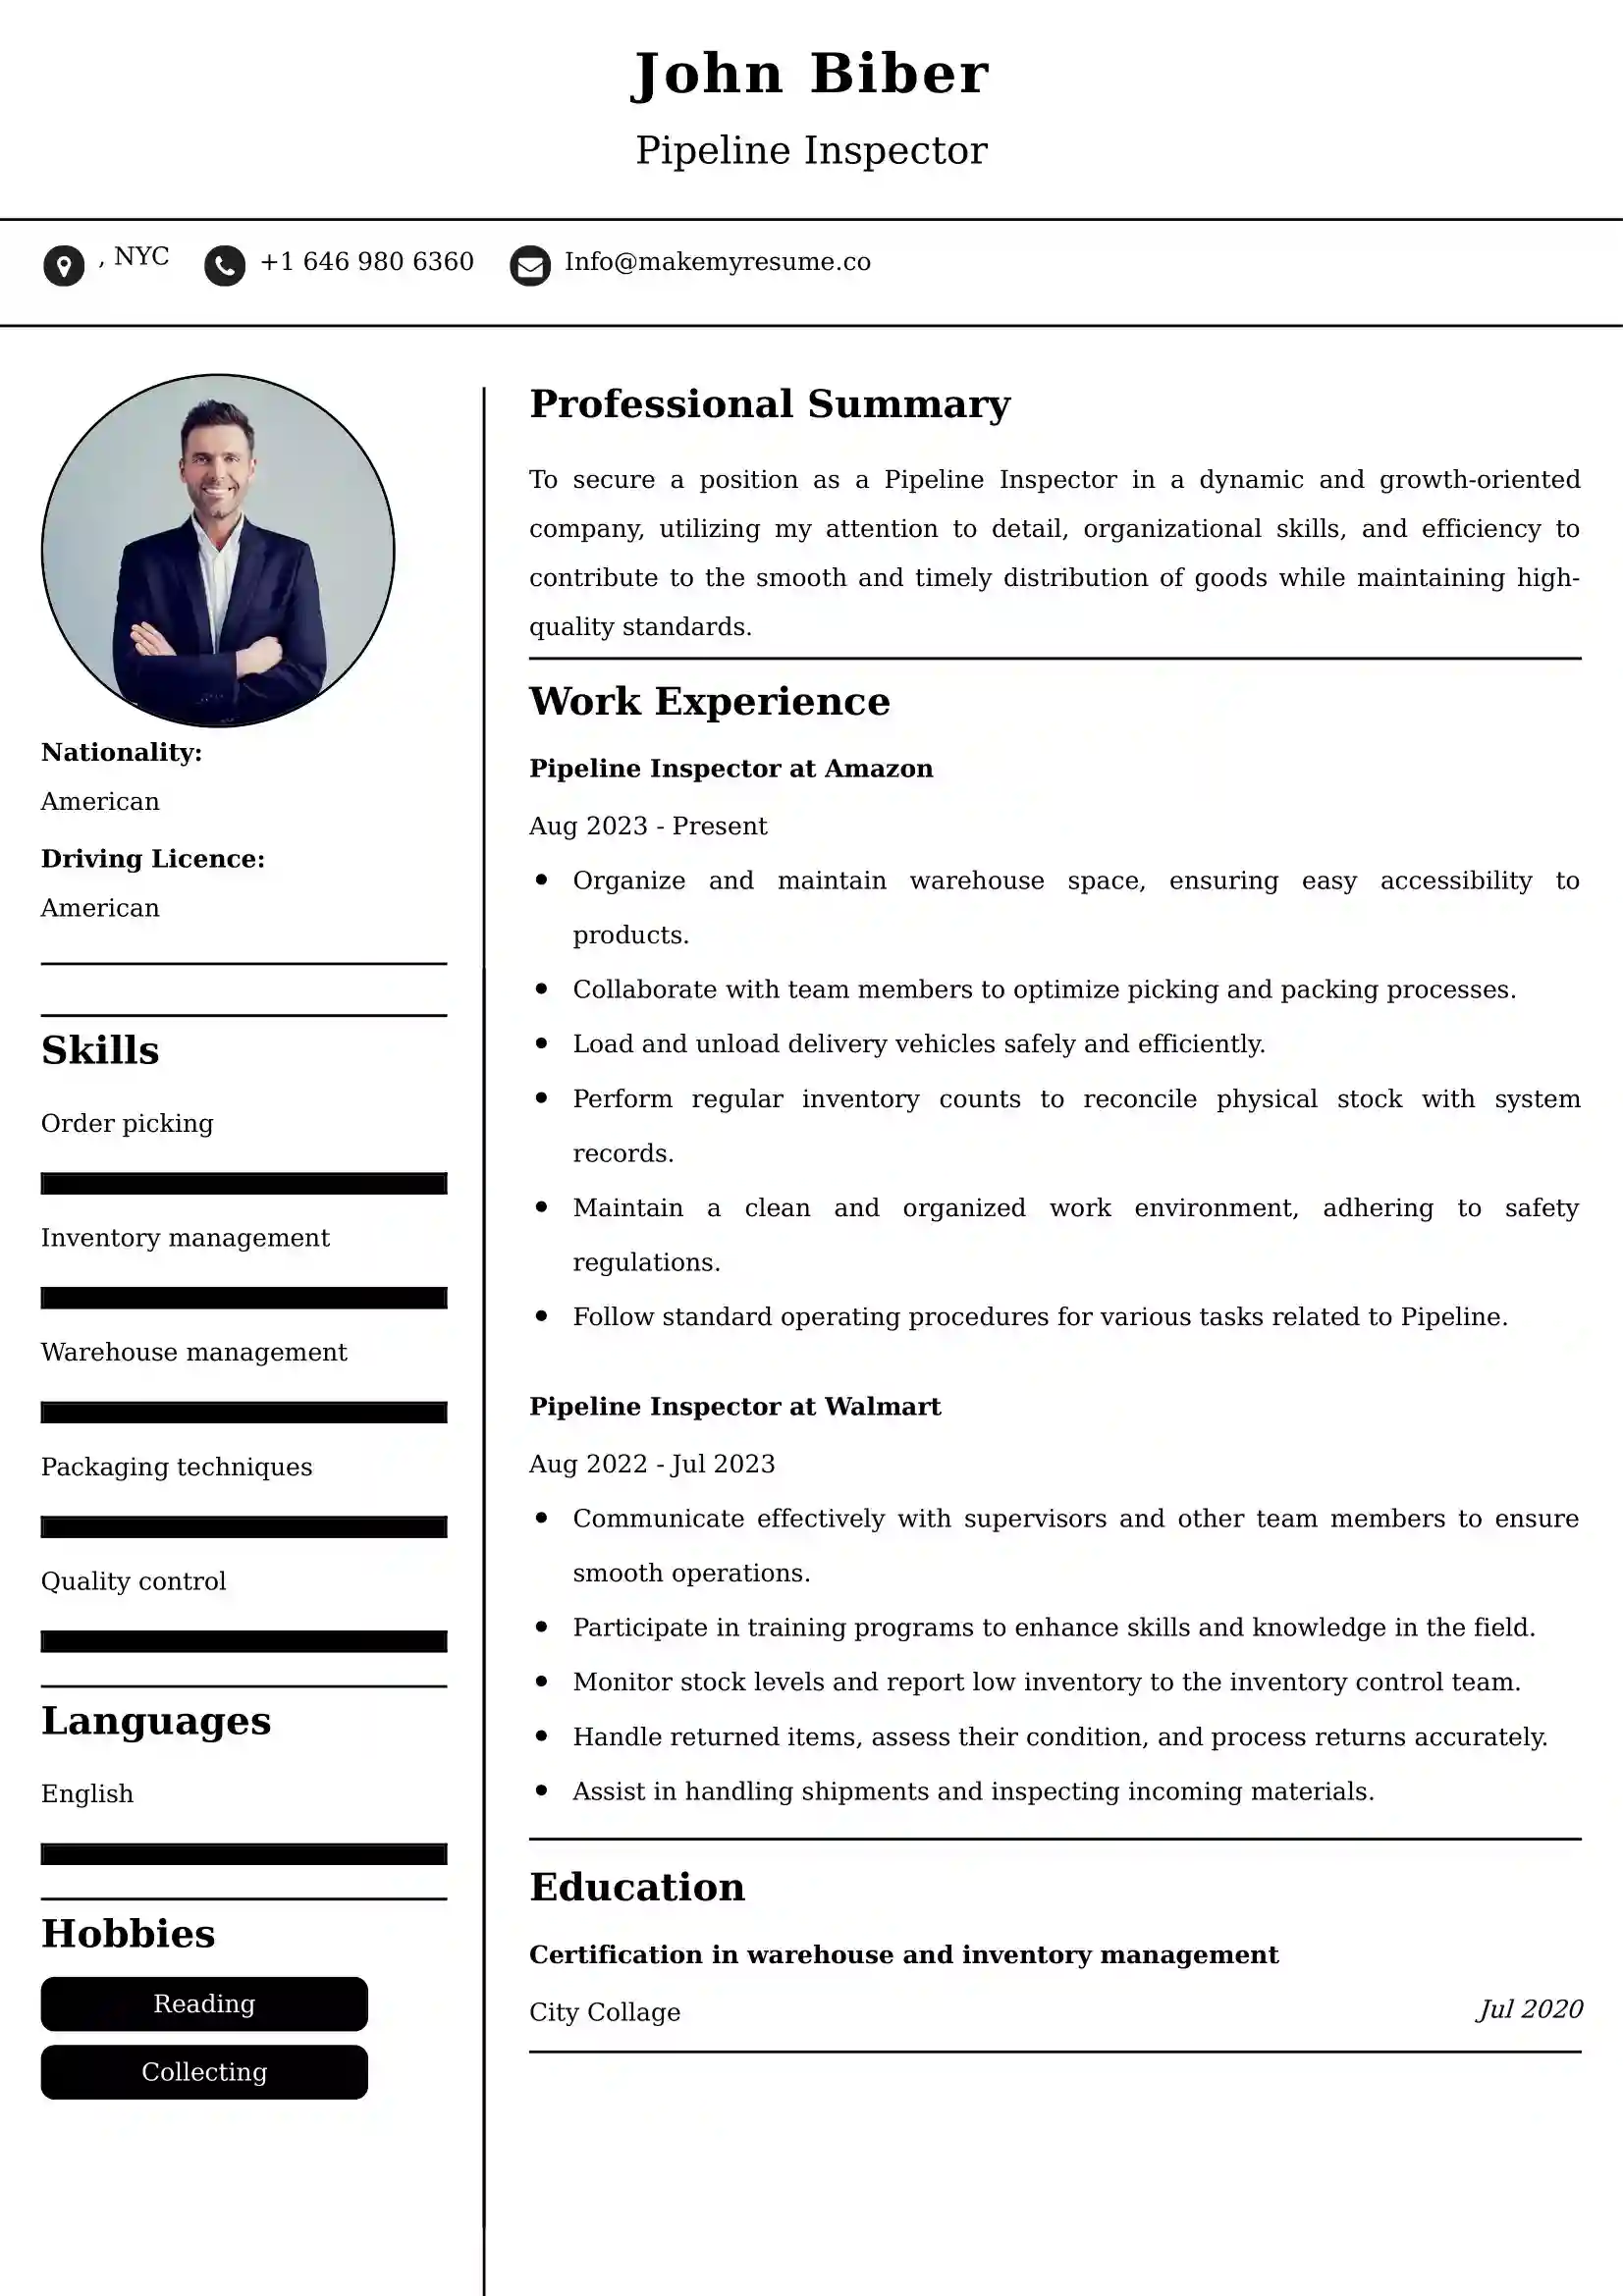 Pipeline Inspector Resume Examples - Australian Format and Tips